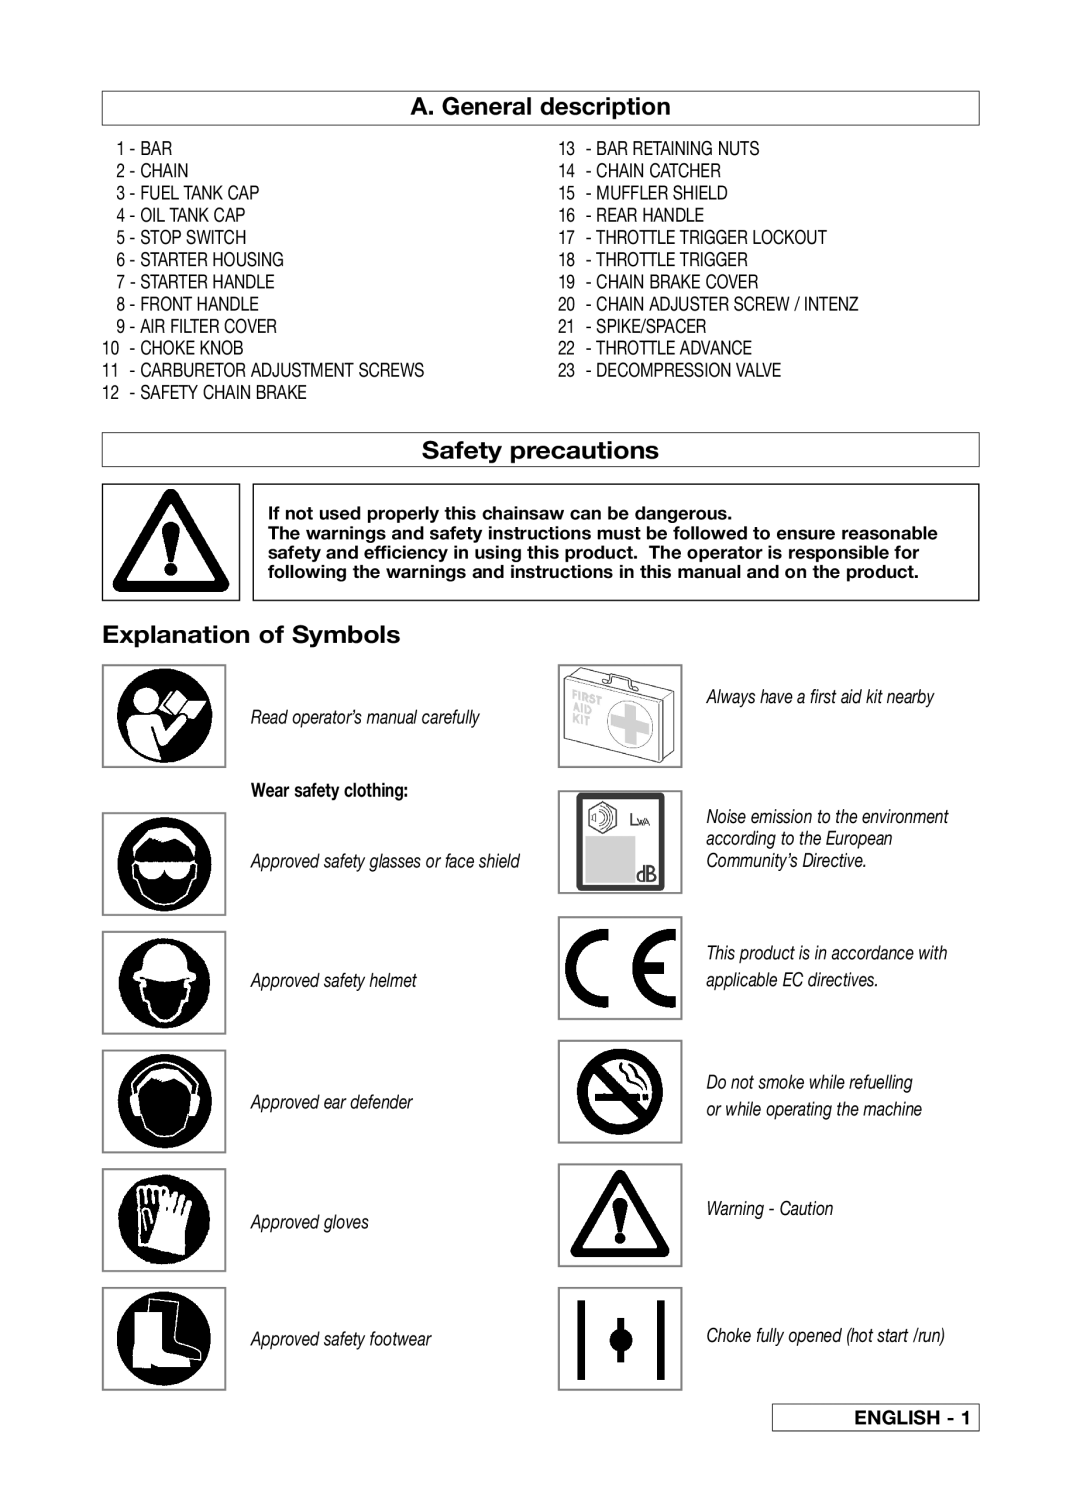 Electrolux 95390028400 A. General description, Safety precautions, Explanation of Symbols, Wear safety clothing, English 